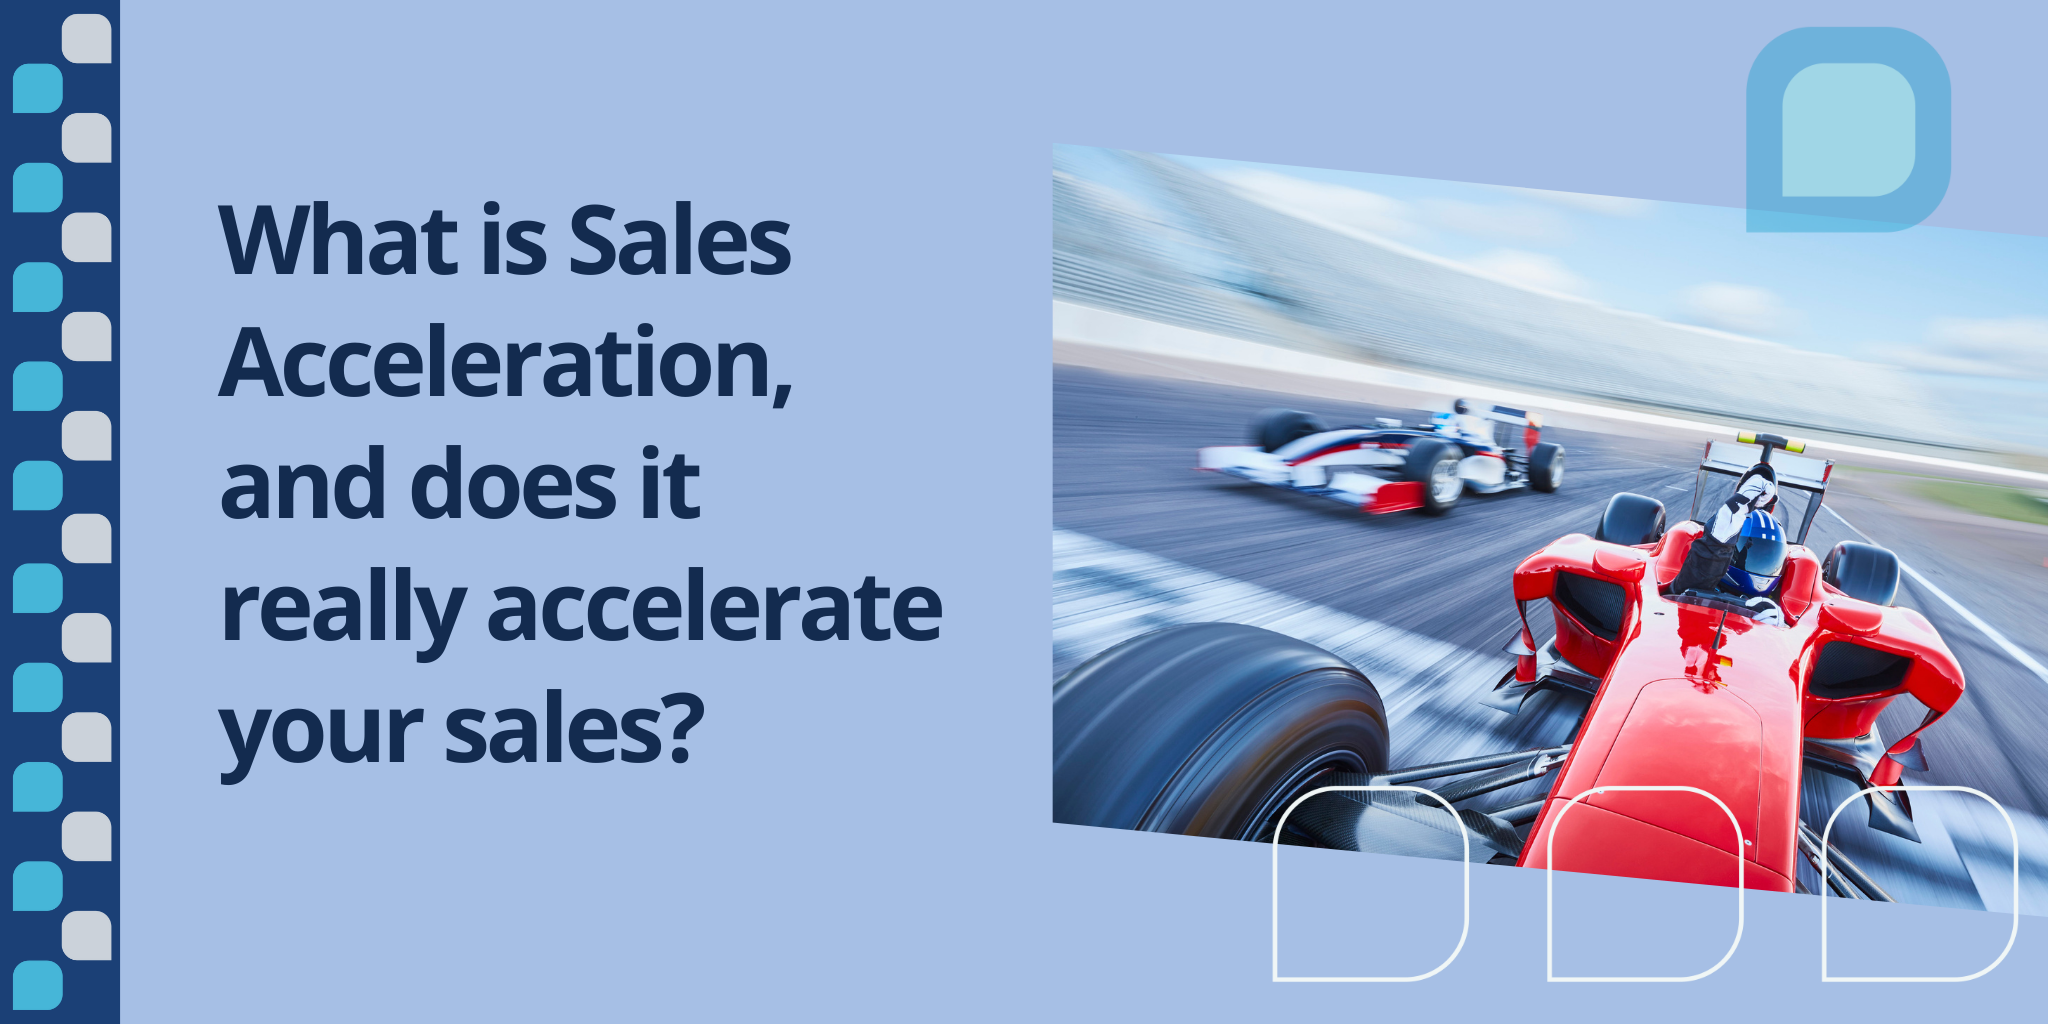 What is Sales Acceleration?